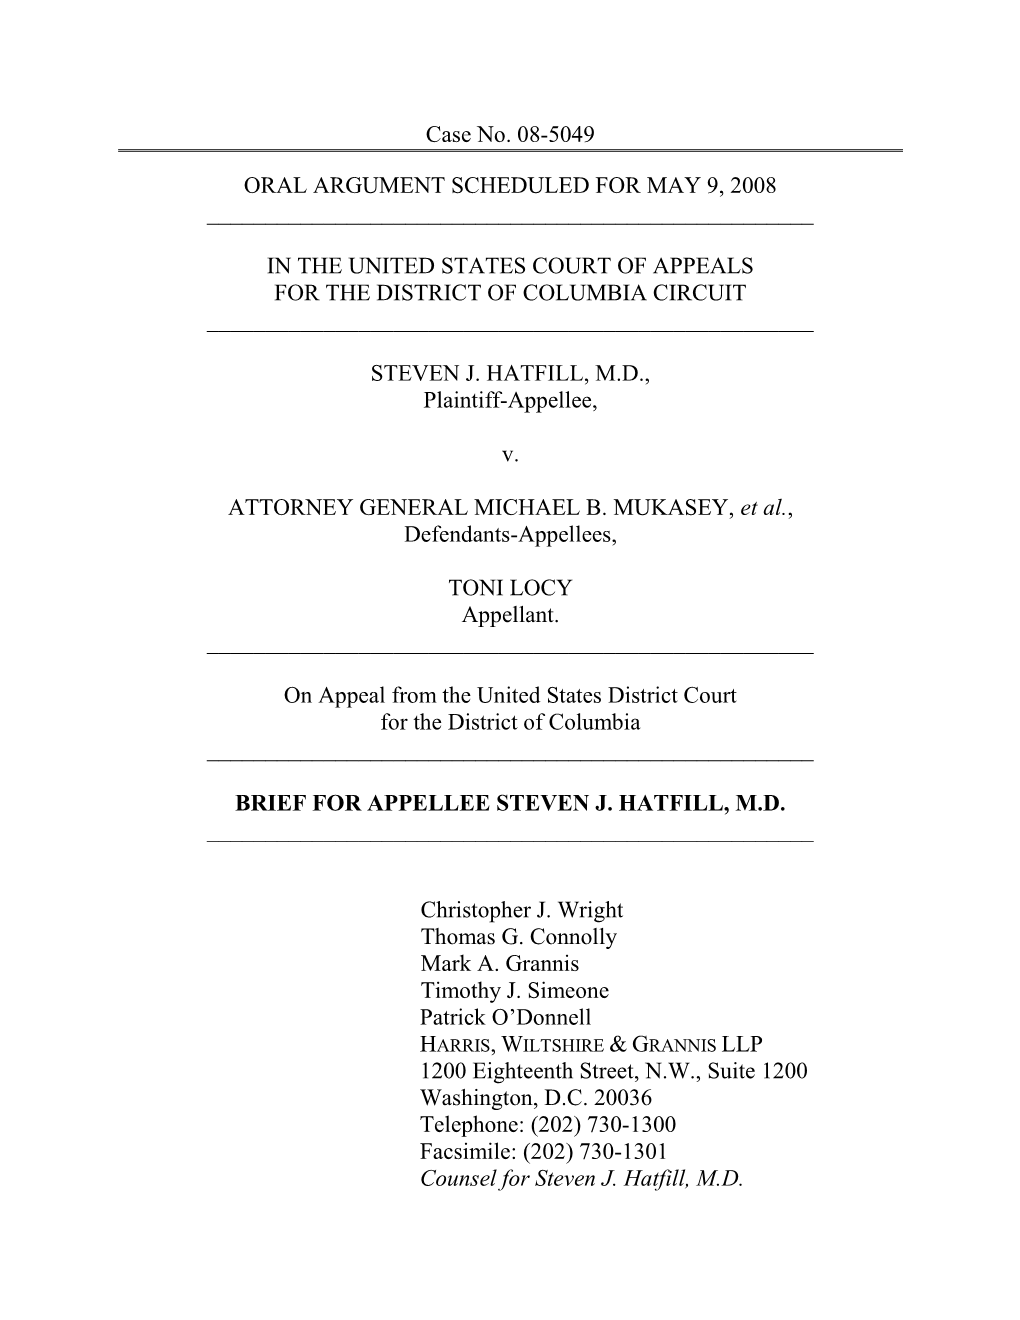 Case No. 08-5049 ORAL ARGUMENT SCHEDULED for MAY 9